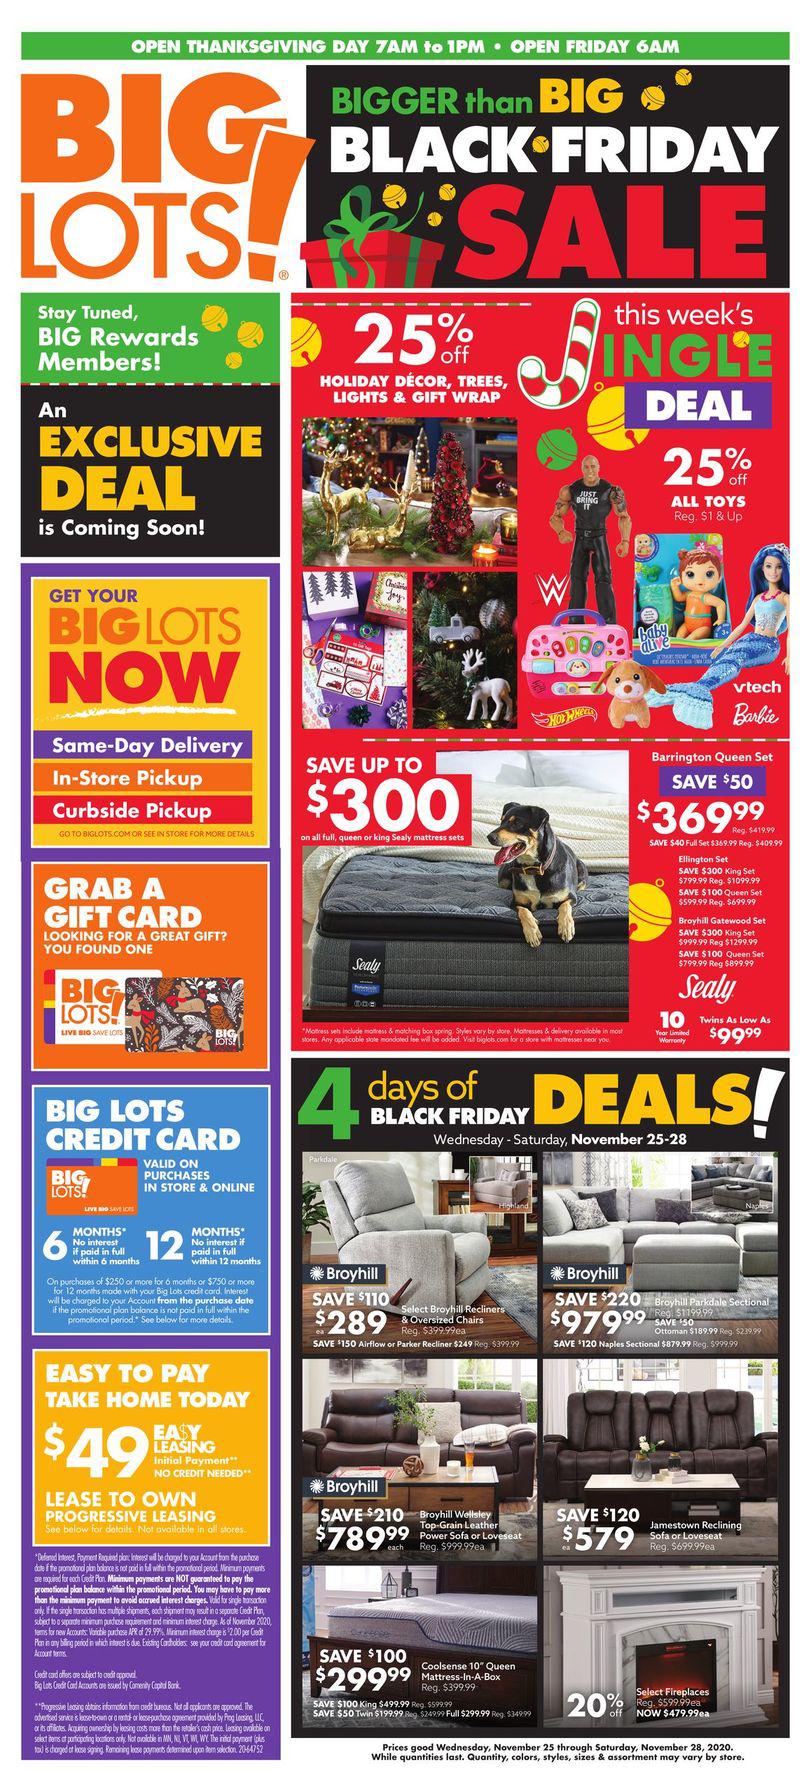 Big Lots Black Friday Sale Ad 2021 - When Are Black Friday Deals Announced 2021